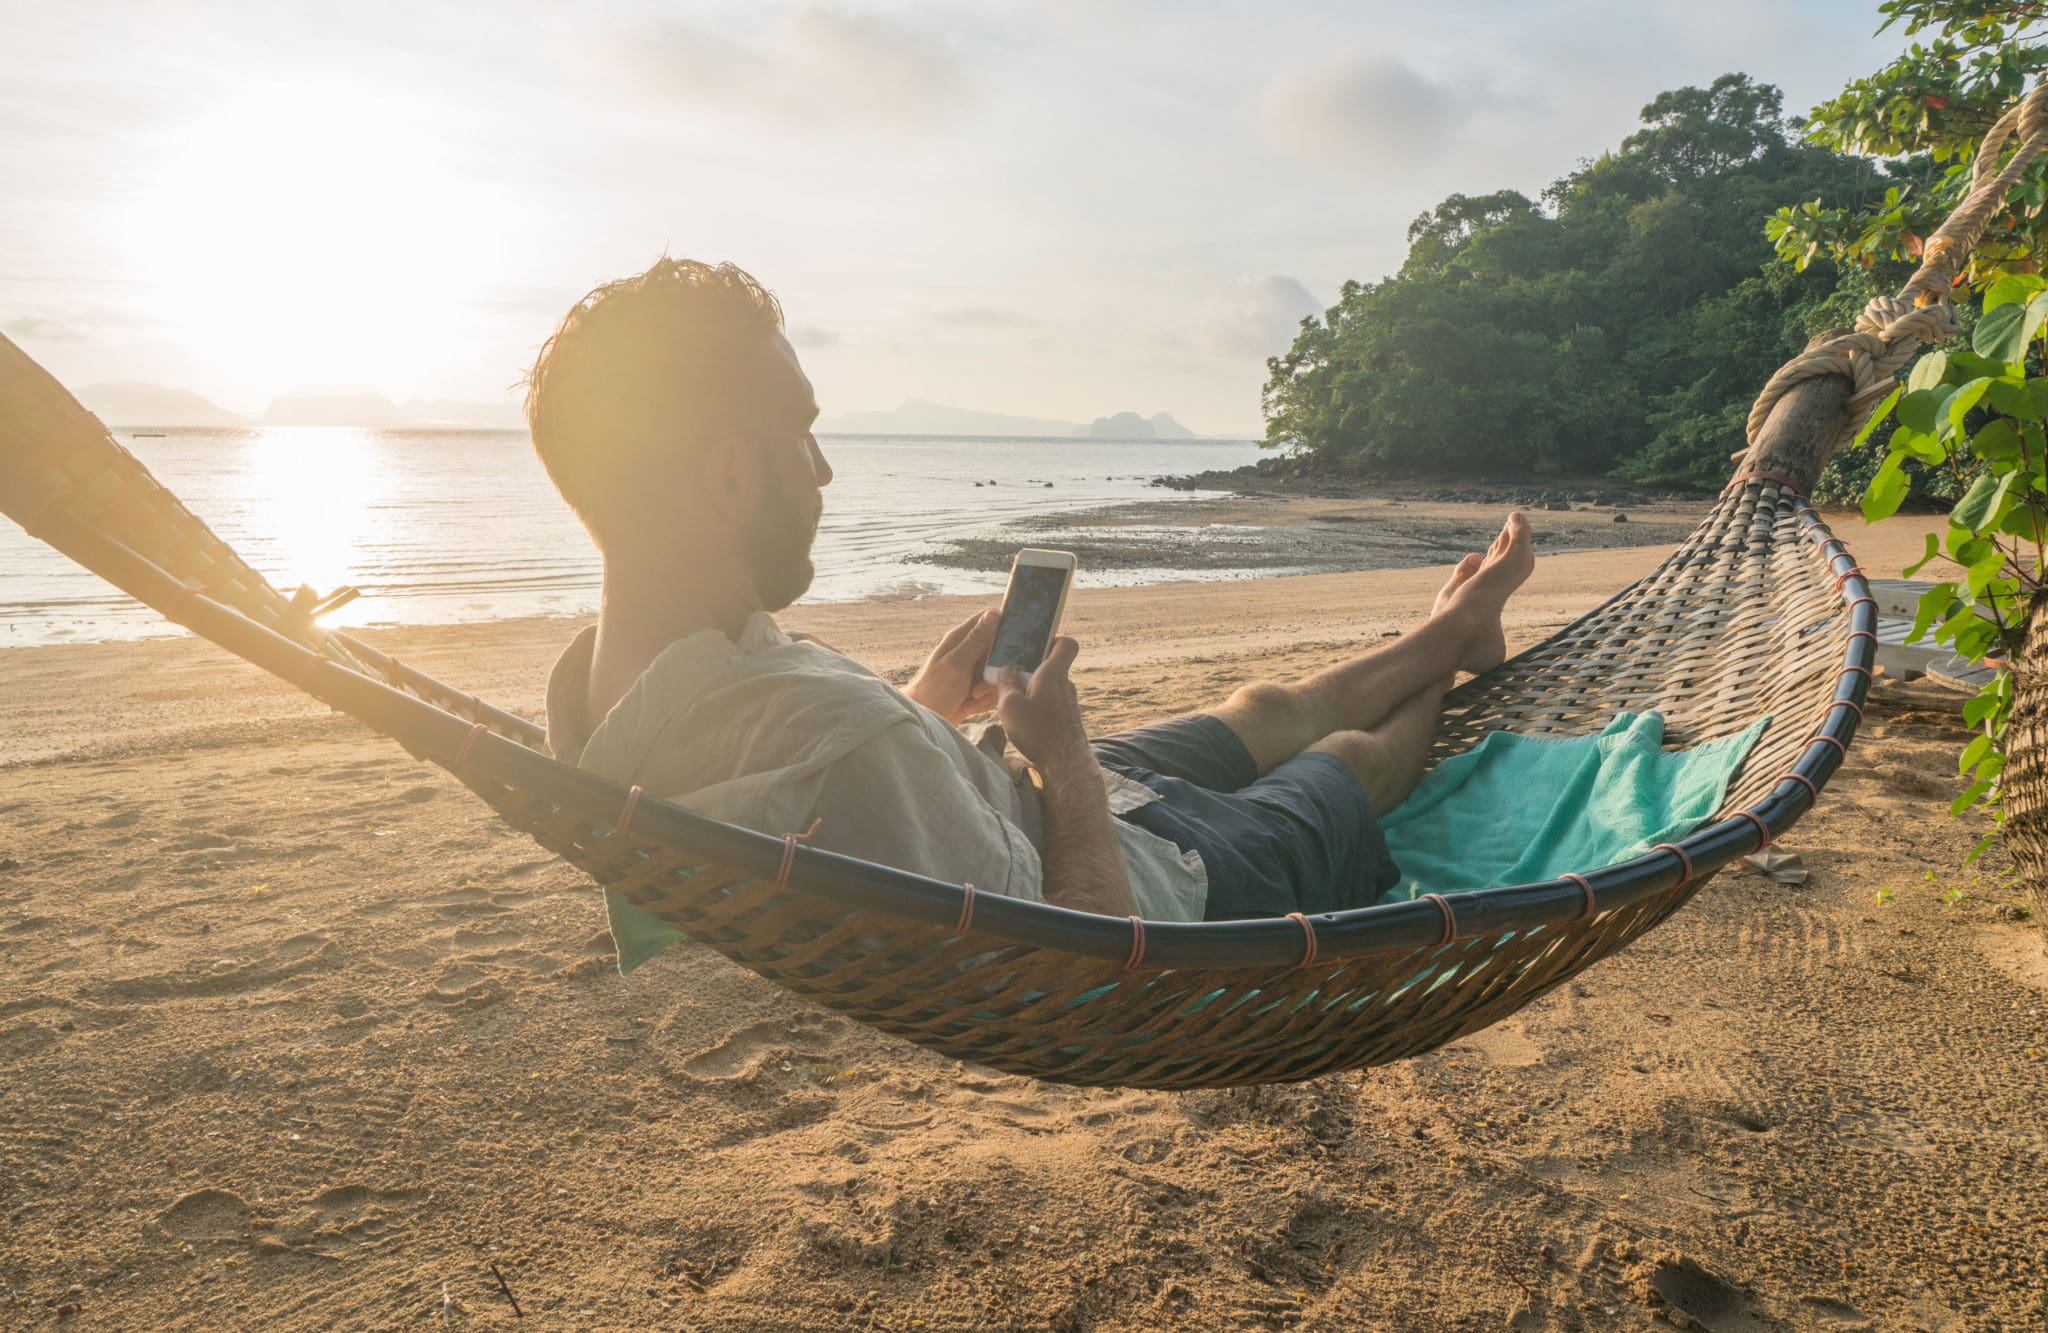 Man lays in hammock and uses smartphone